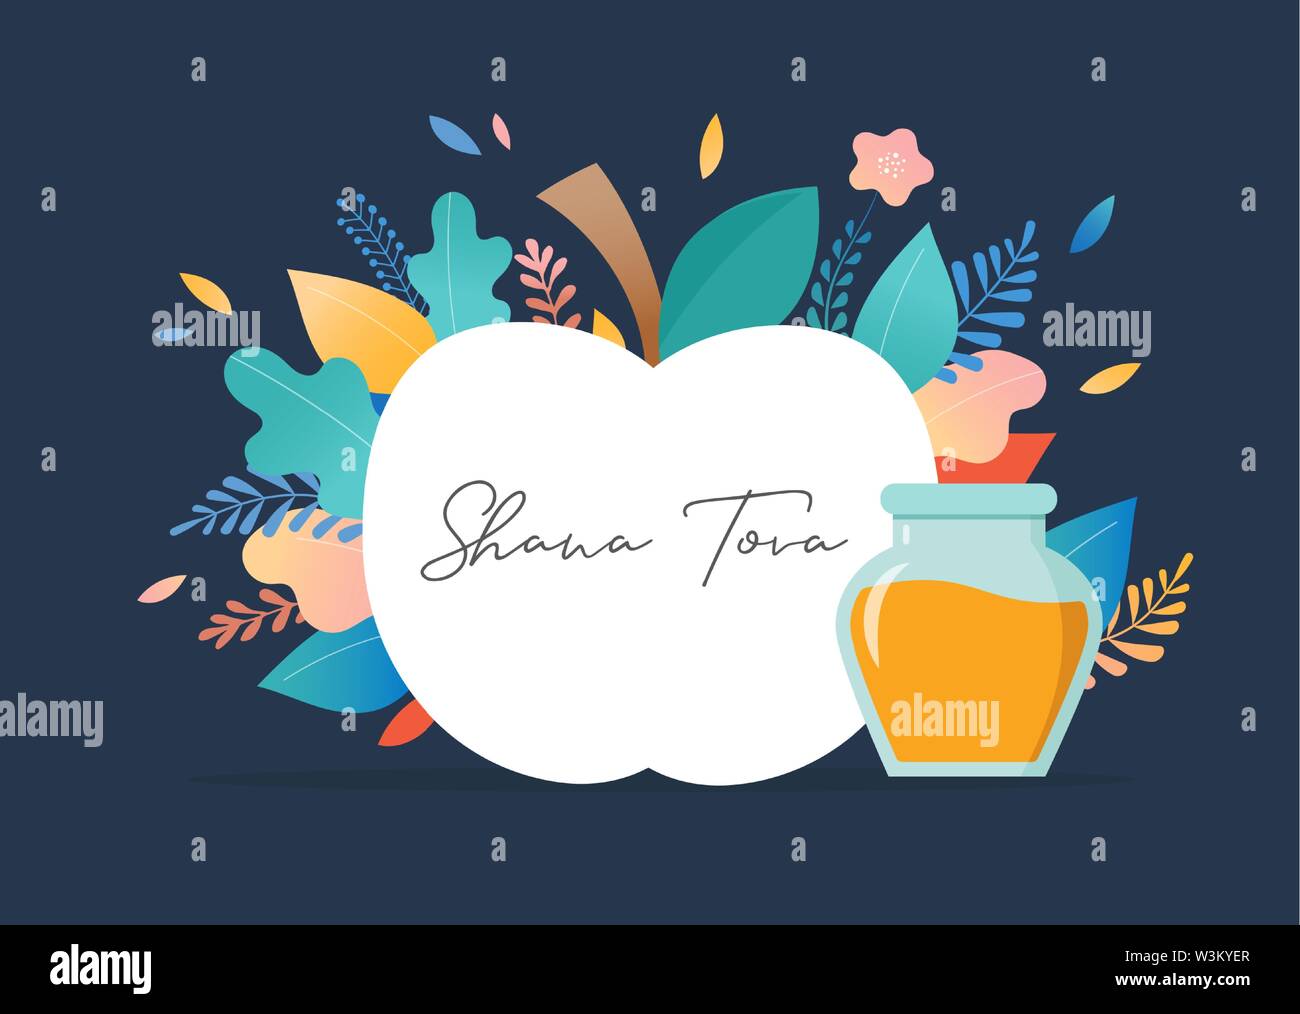 Rosh Hashana, Jewish holiday, New year scene with an apple, honey, flowers and leaves. Flat cartoon vector illustration for Jewish religious holiday c Stock Vector